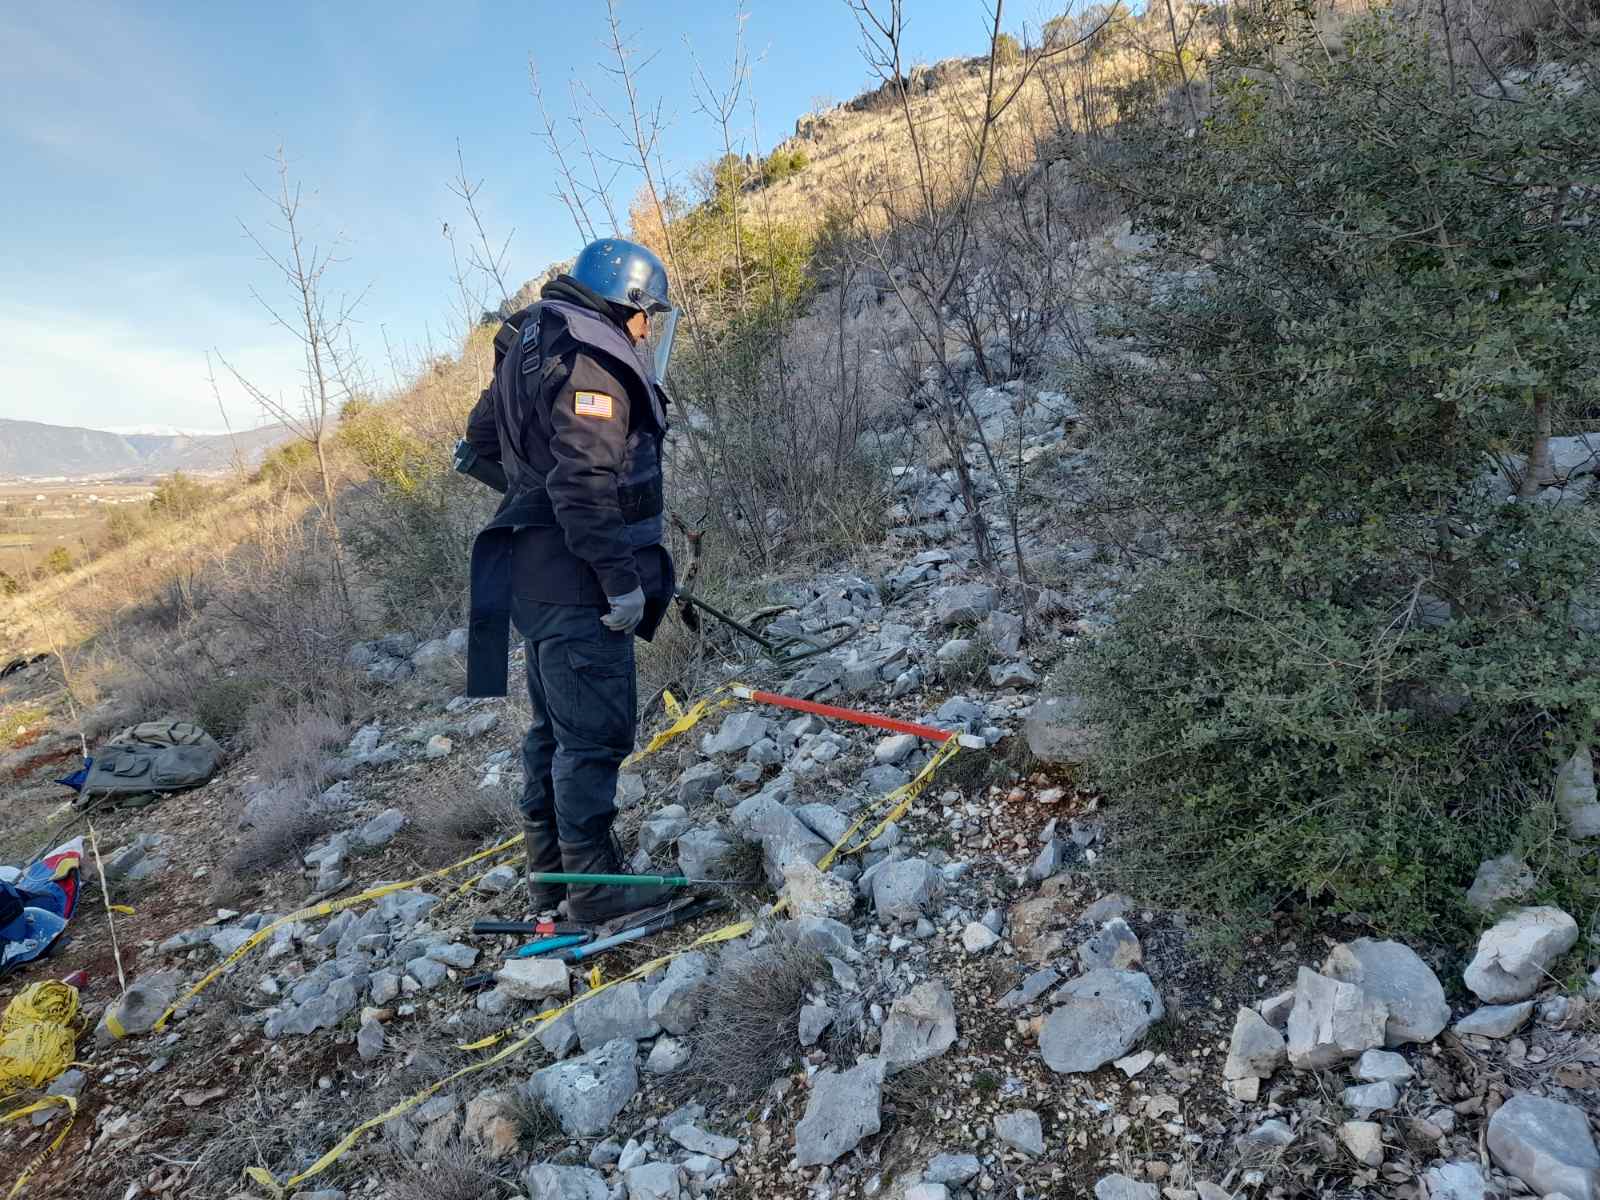 A U.S.-funded deminer surveying a confirmed hazardous area (Photo courtesy of MDDC).